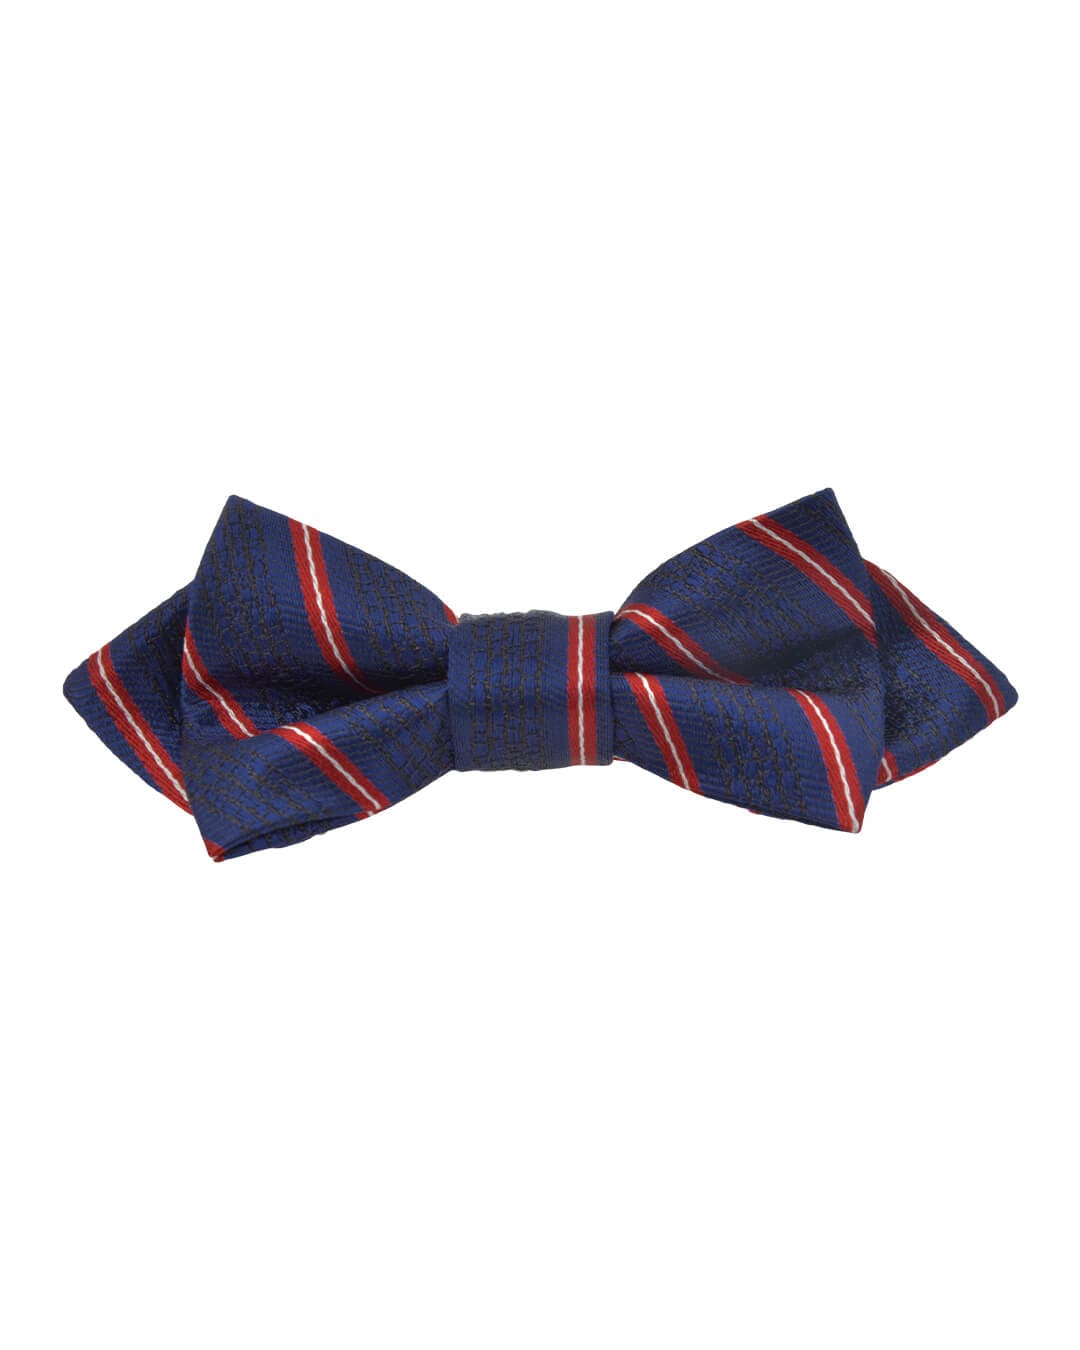 Gagliardi Bow Ties Gagliardi Navy Textured With Red And White Striped Bow Tie